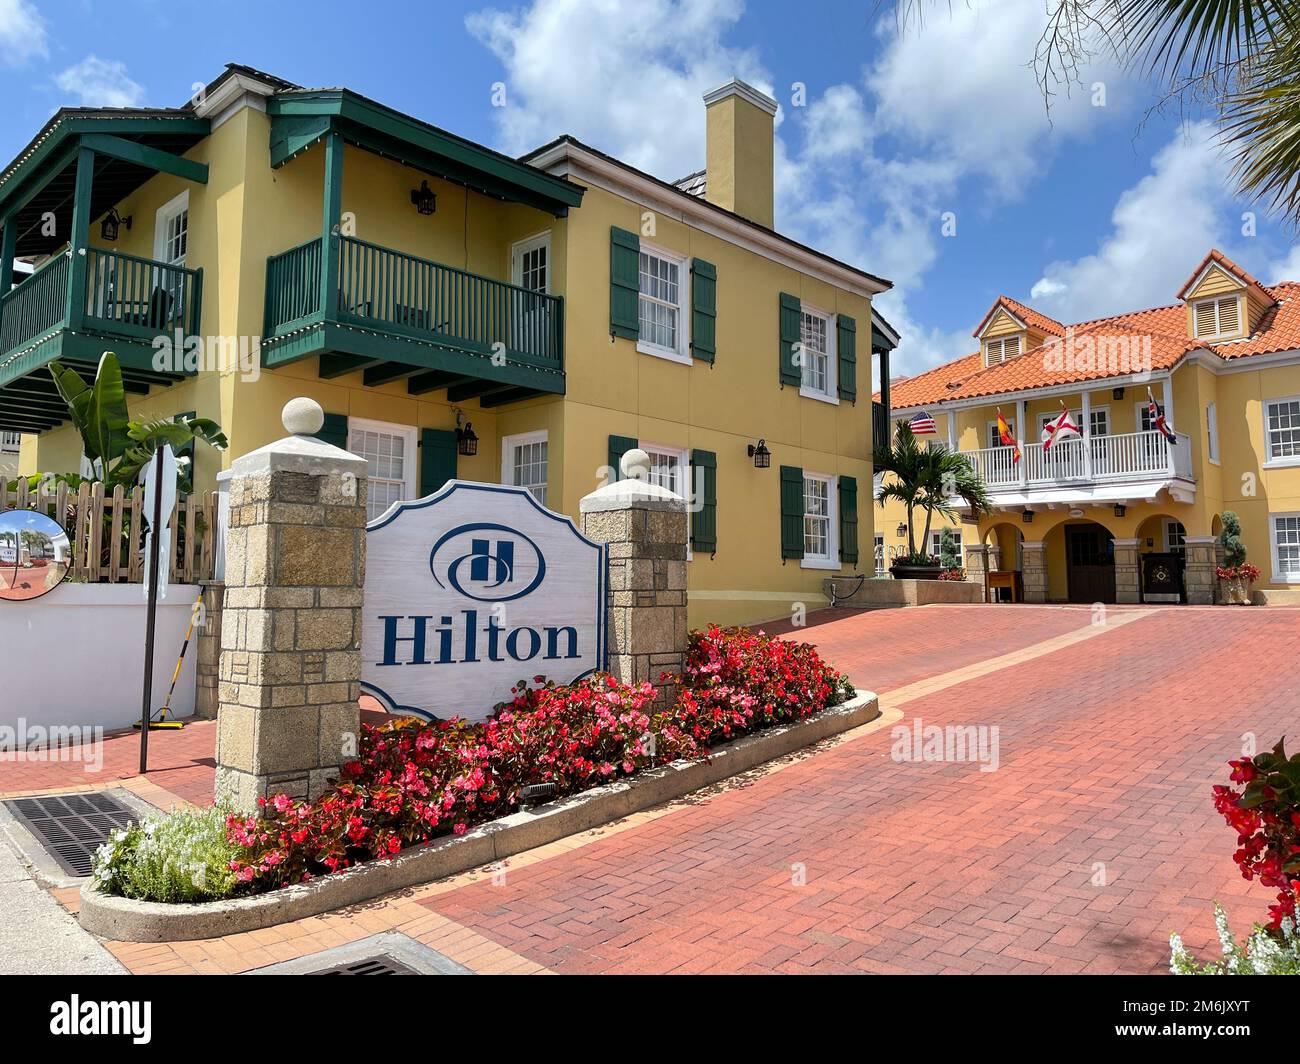 St. Augustine, FL USA - July 14, 2021:  The exterior of the Hilton Hotel in St. Augustine, Florida. Stock Photo